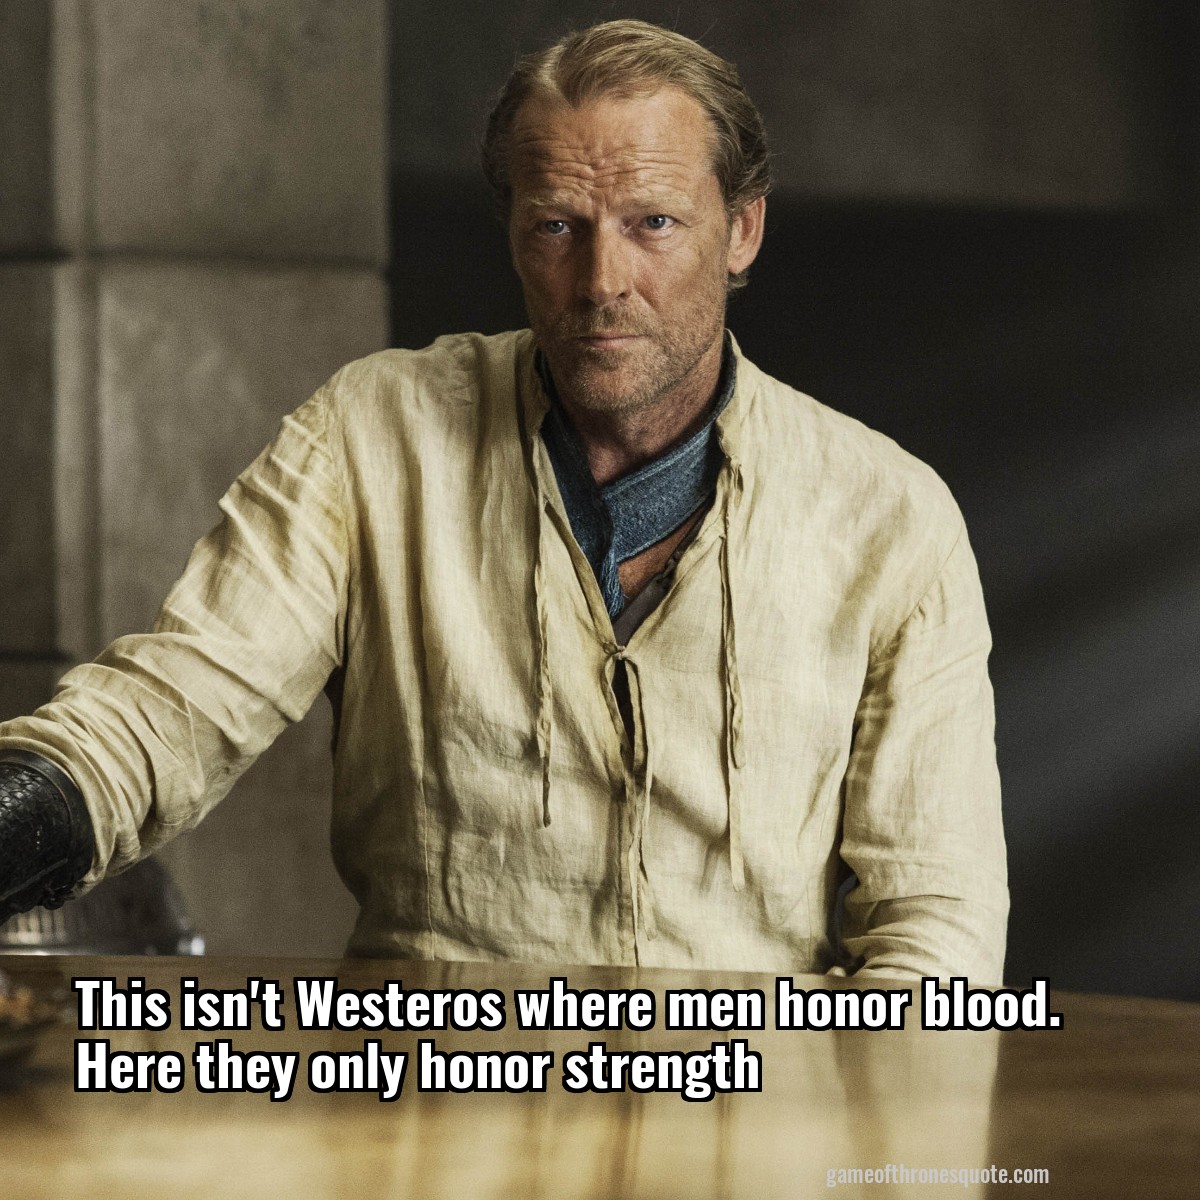 This isn't Westeros where men honor blood. Here they only honor strength